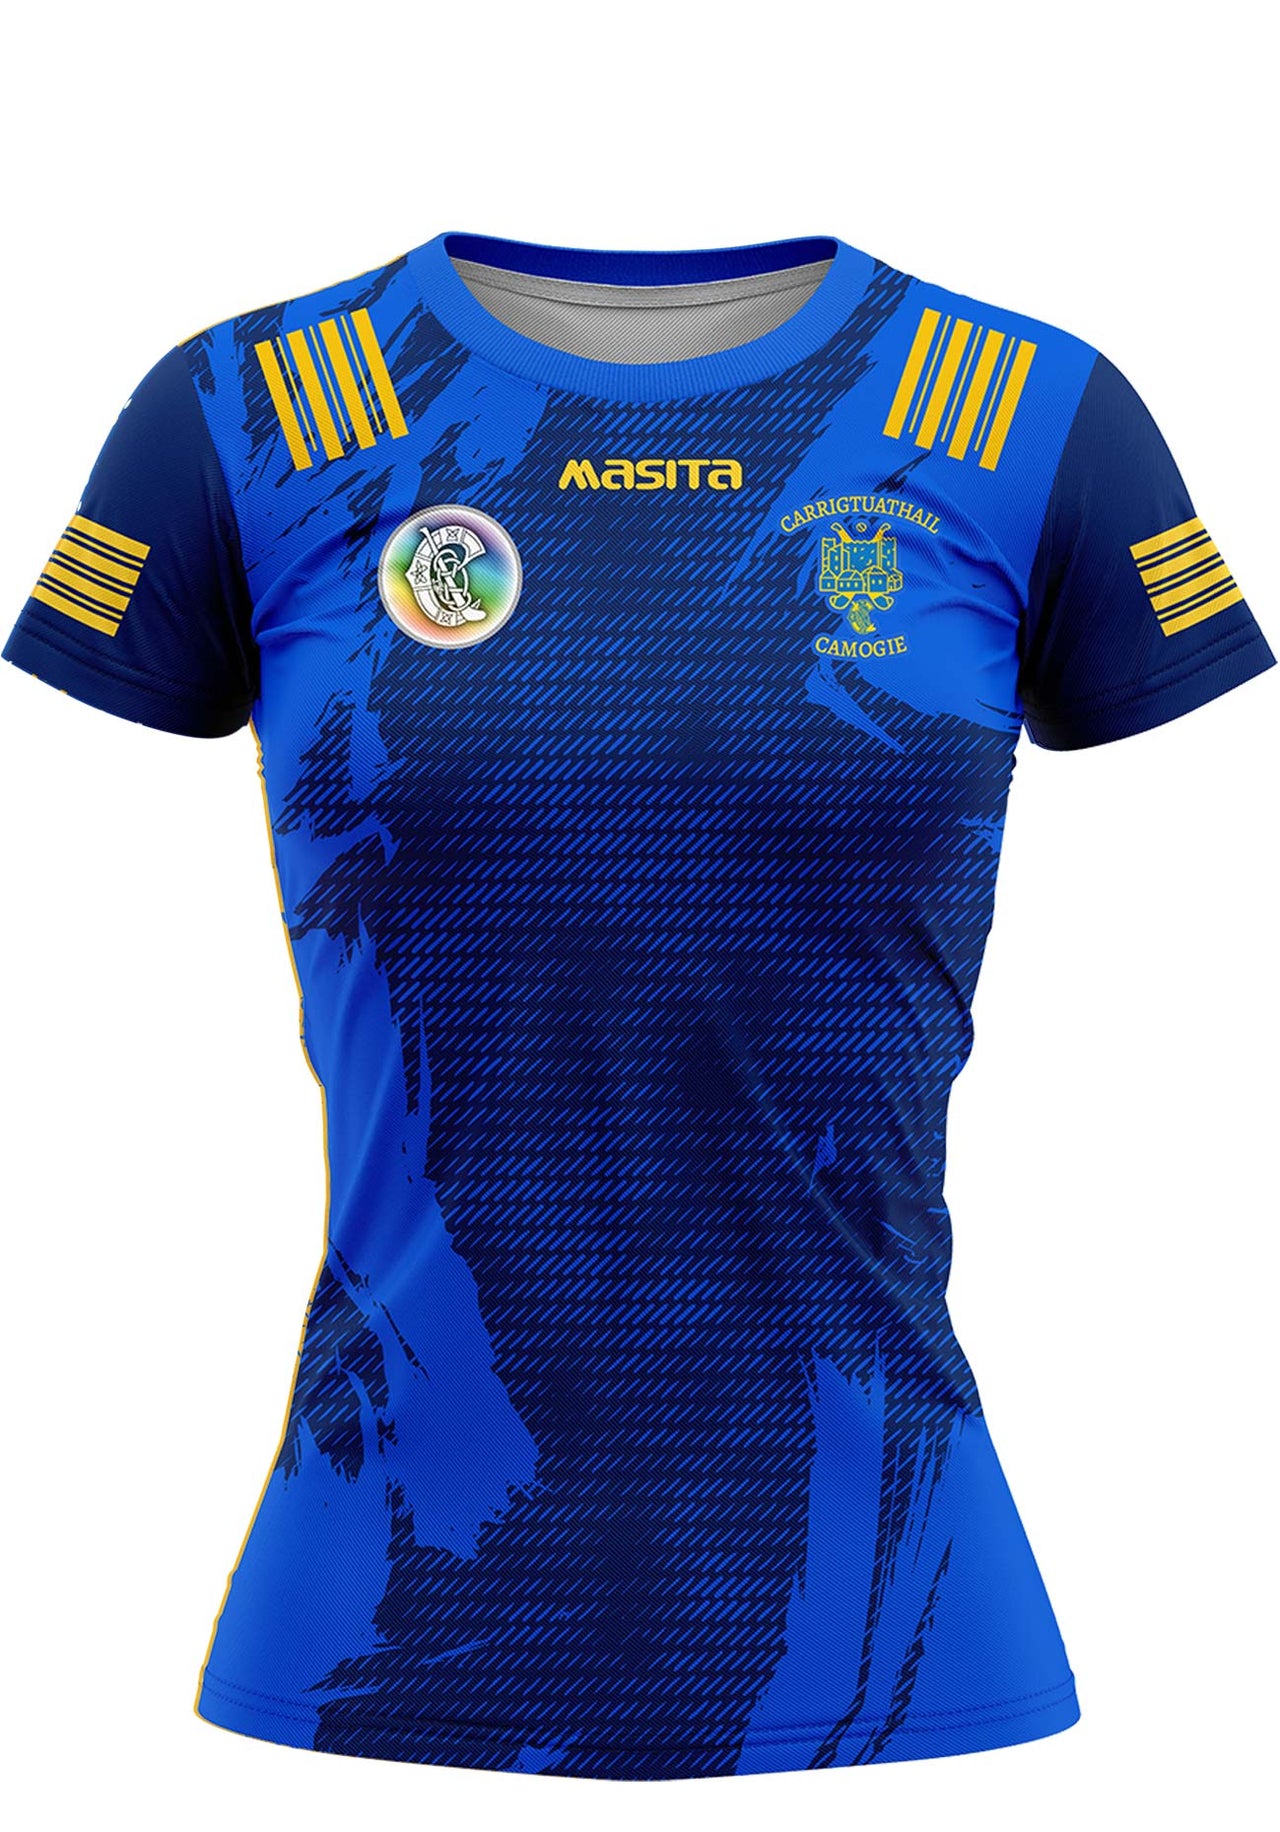 Carrigtwohill Camogie Training Jersey Kids